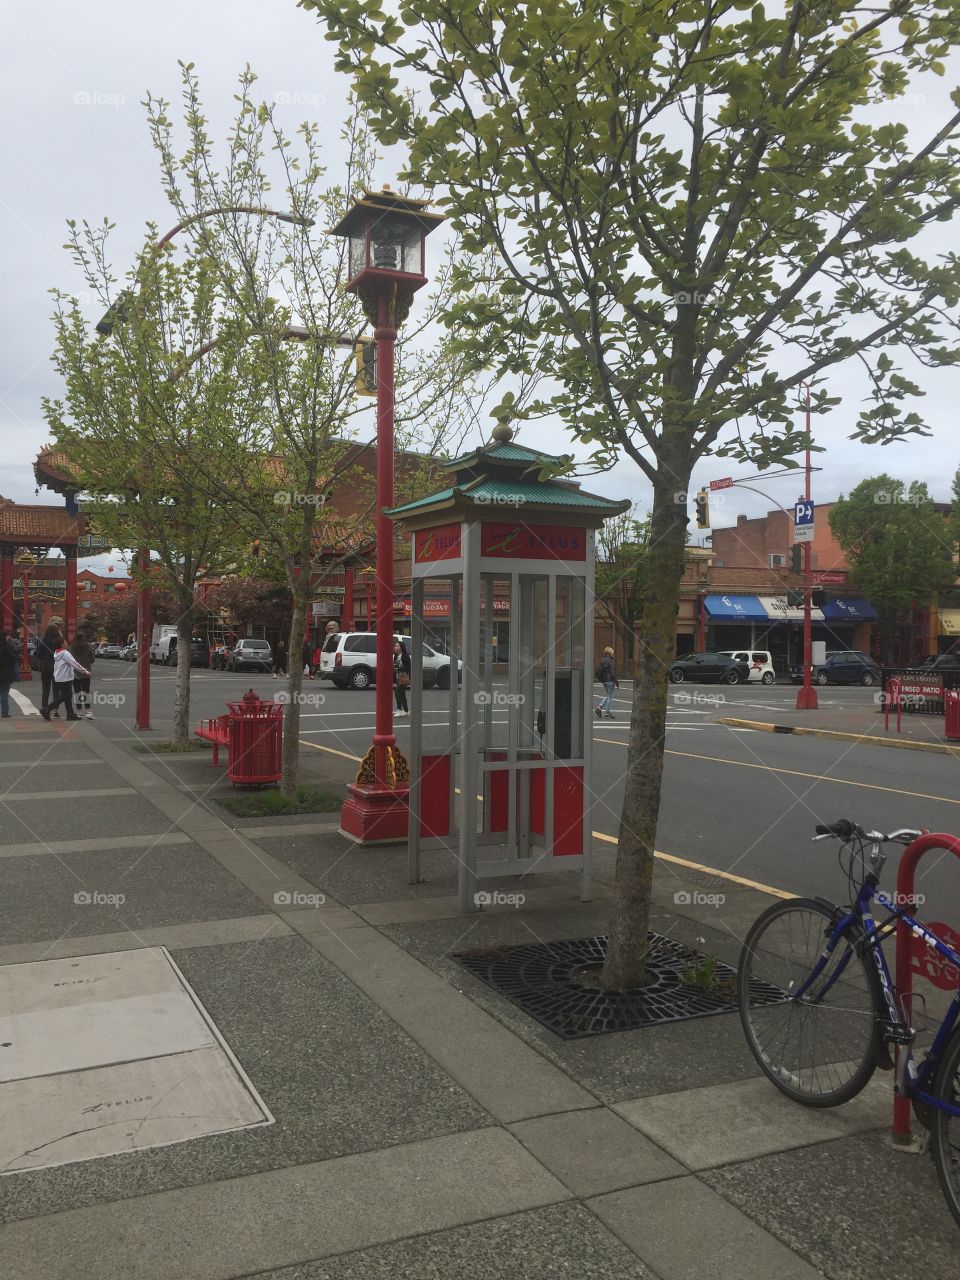 China town telephone booth